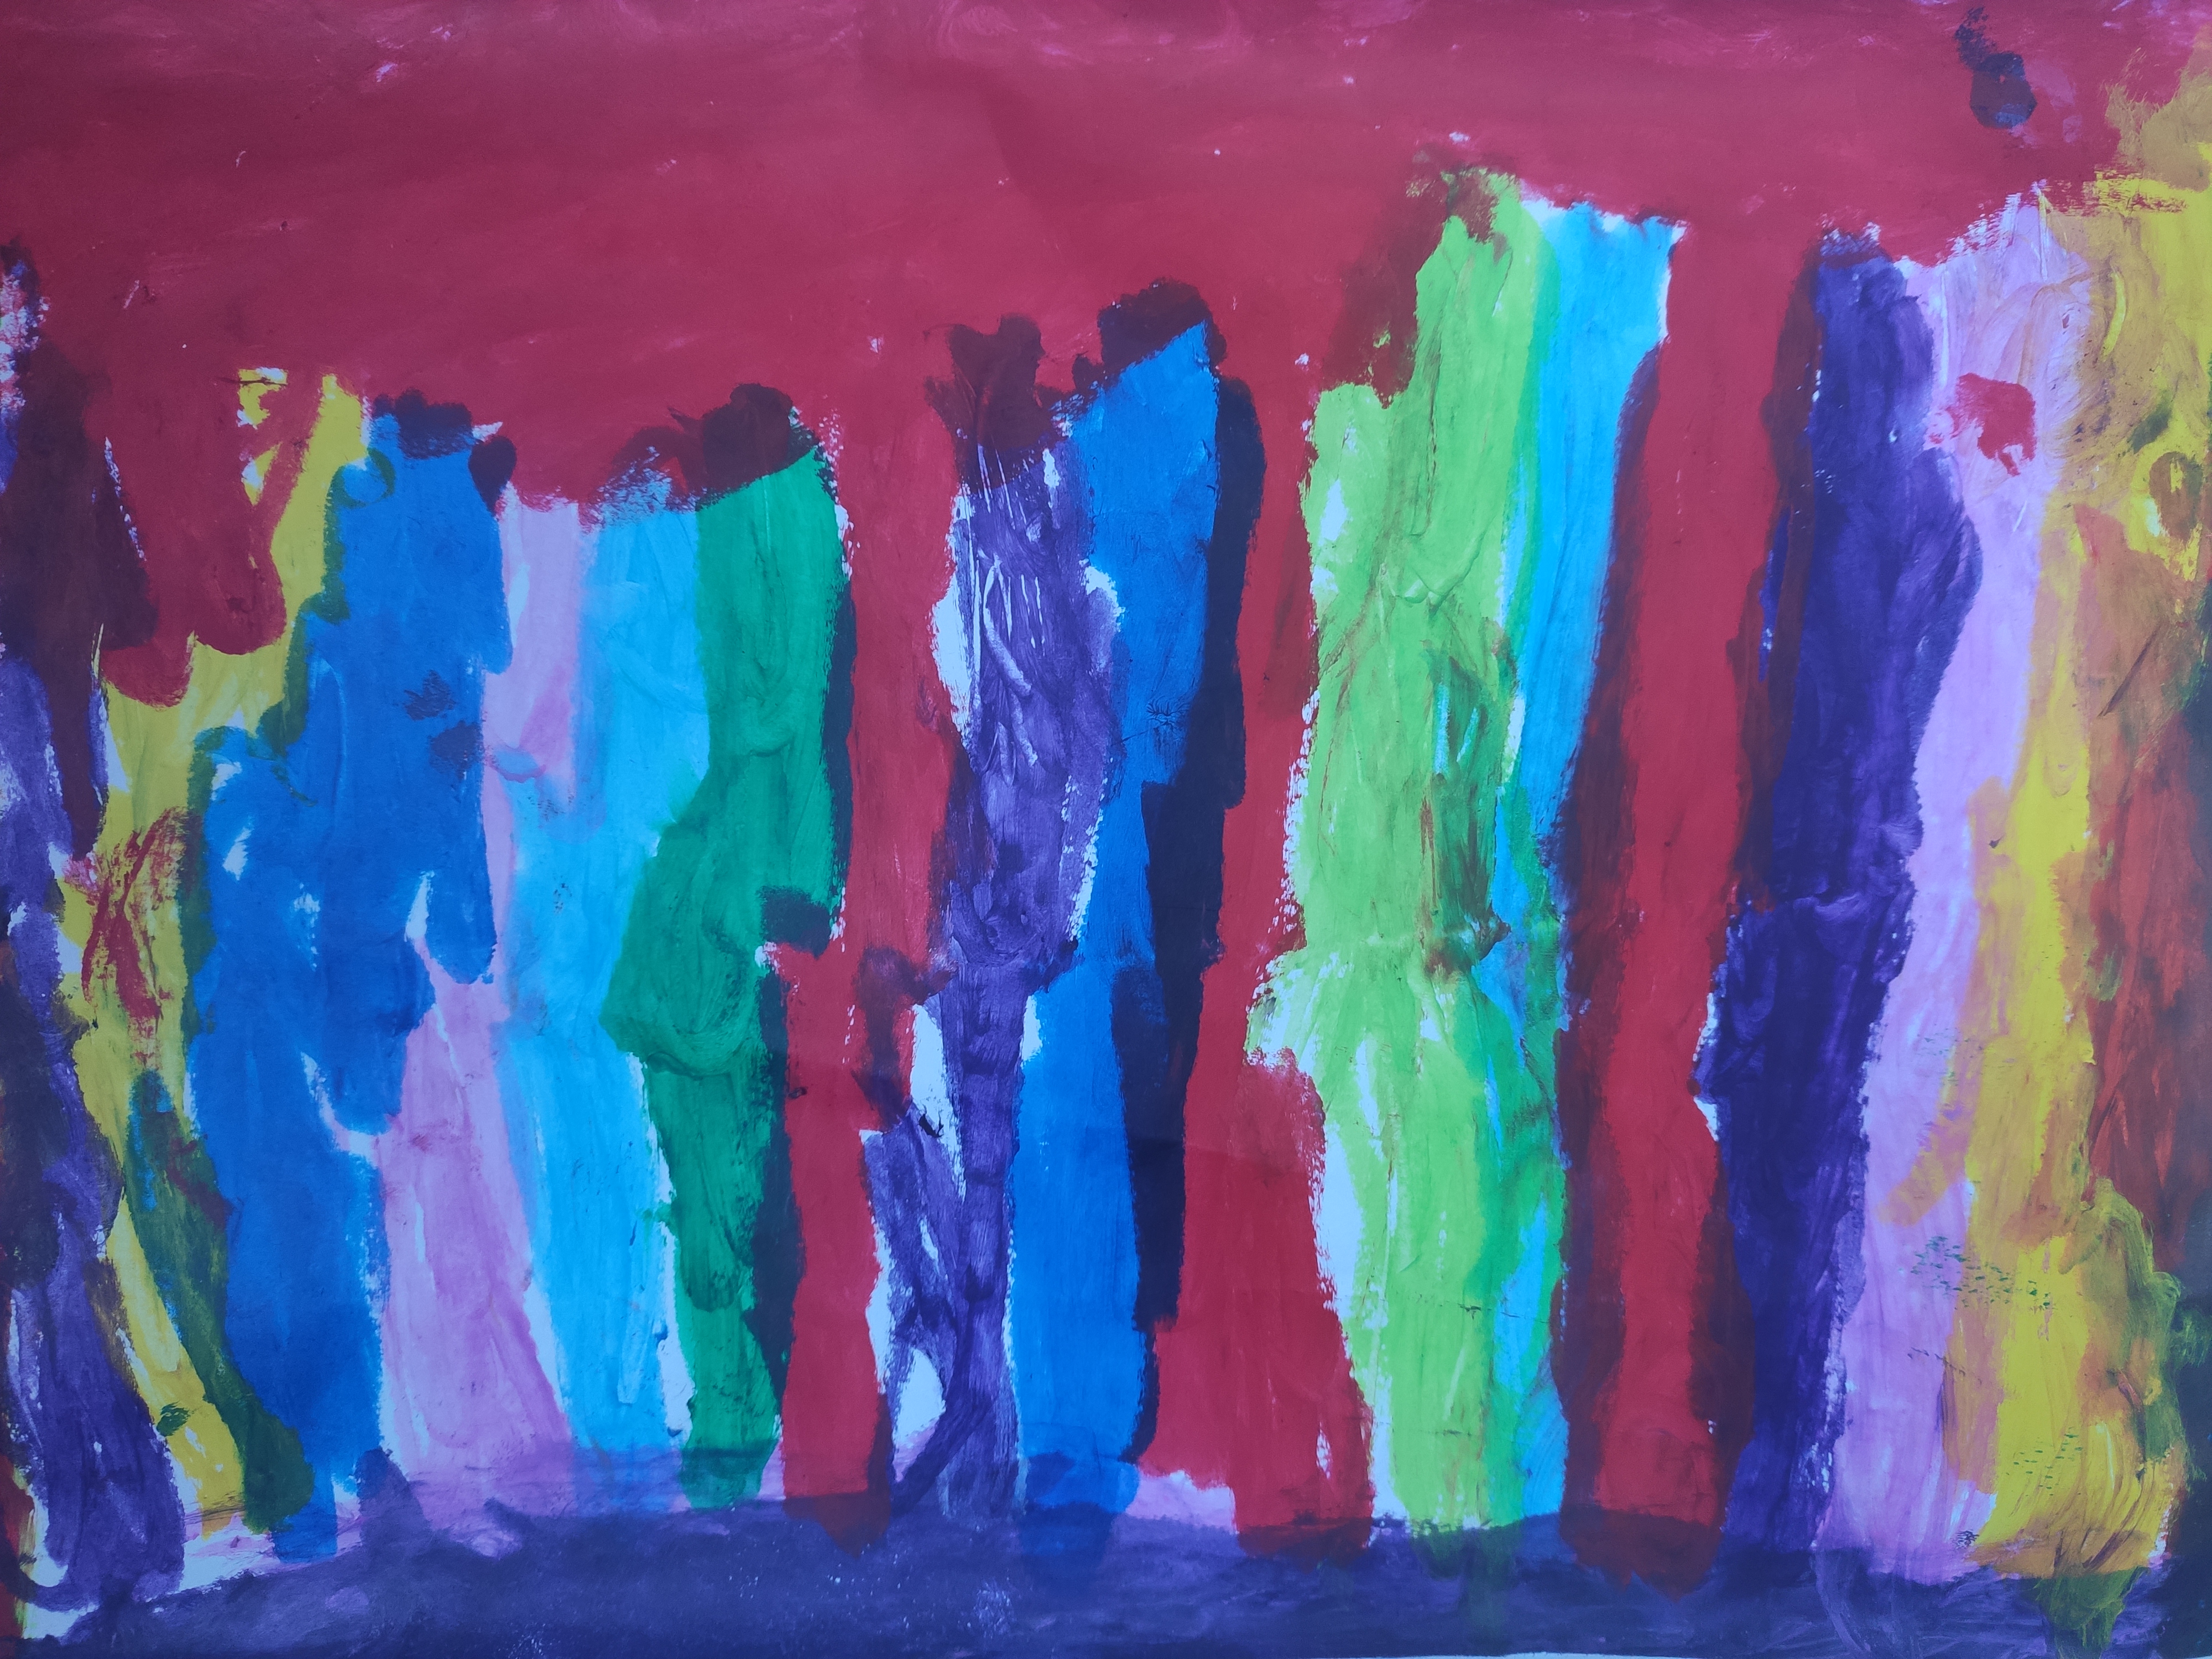 'Rainbow' by Fionn (5) from Tipperary